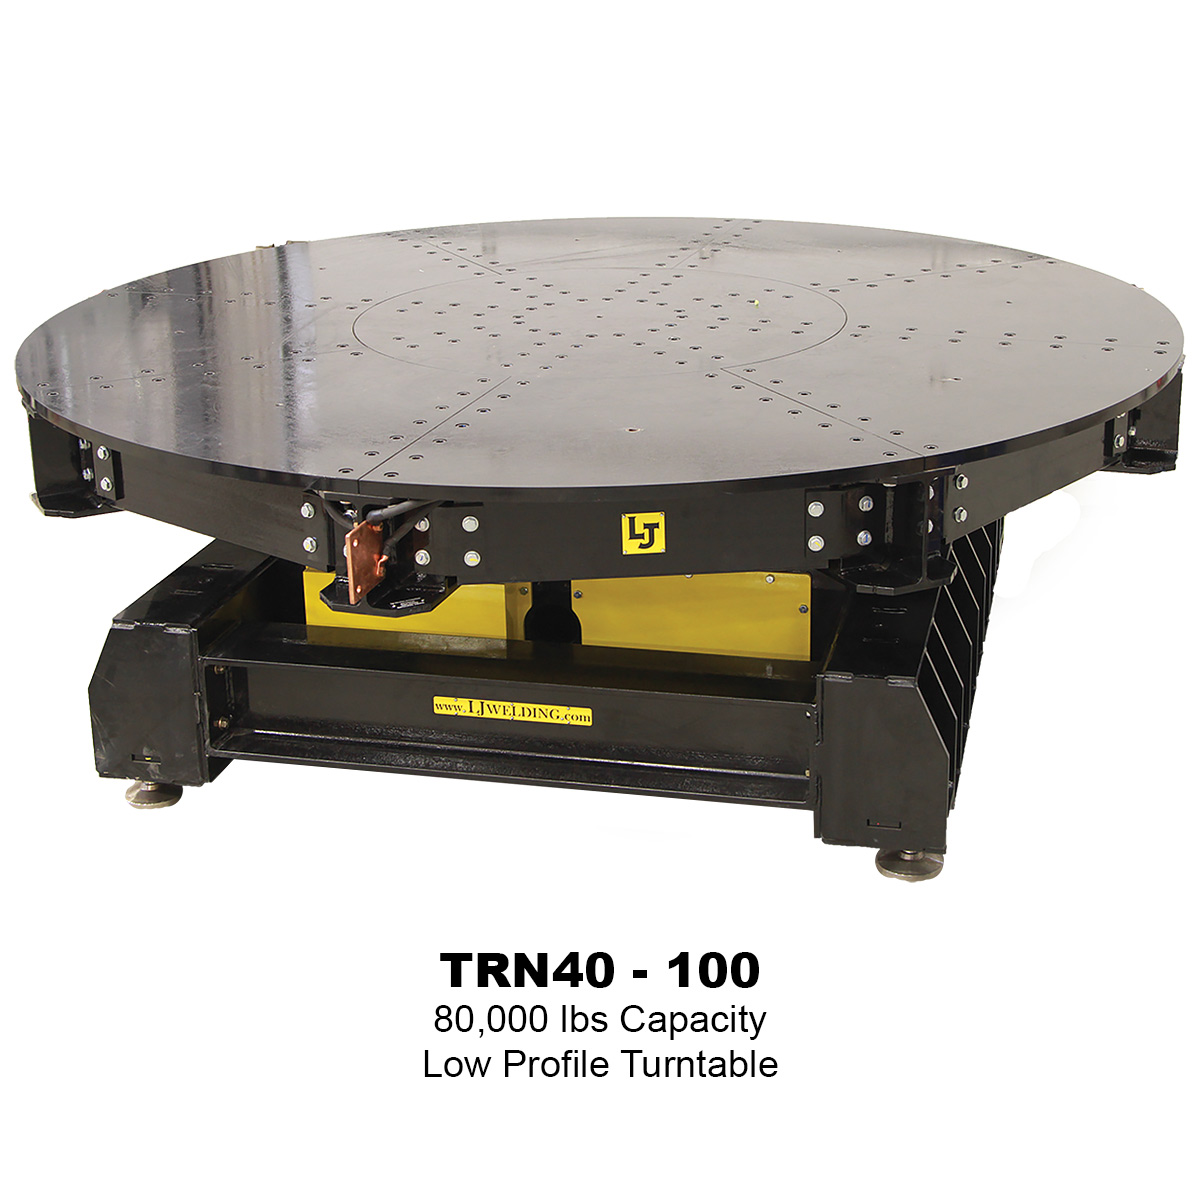 01-80000lbs-Low-Profile-Turntable